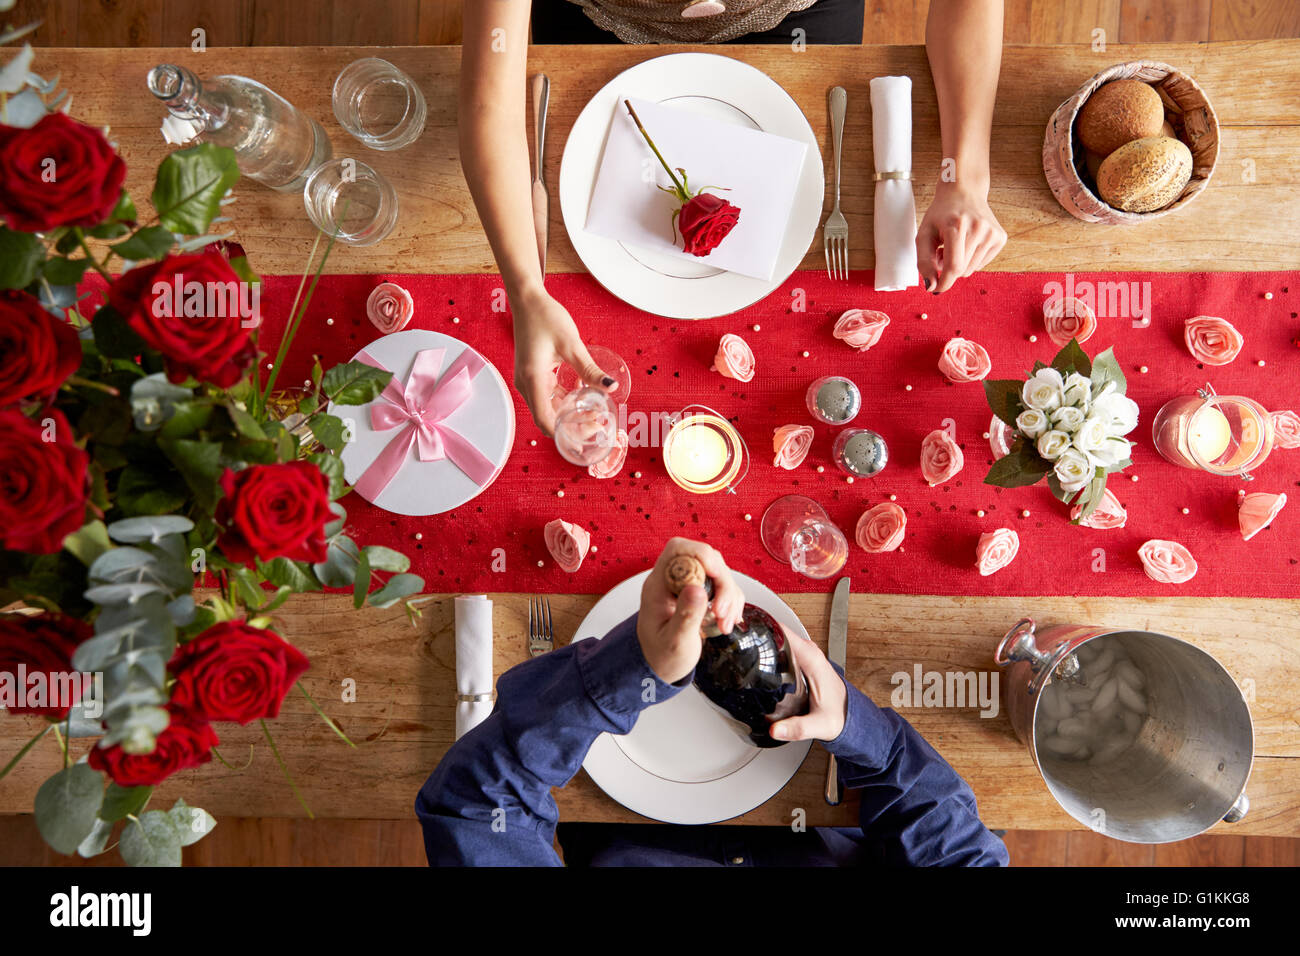 Overhead View Of Romantic Couple At Valentines Day Meal Stock Photo